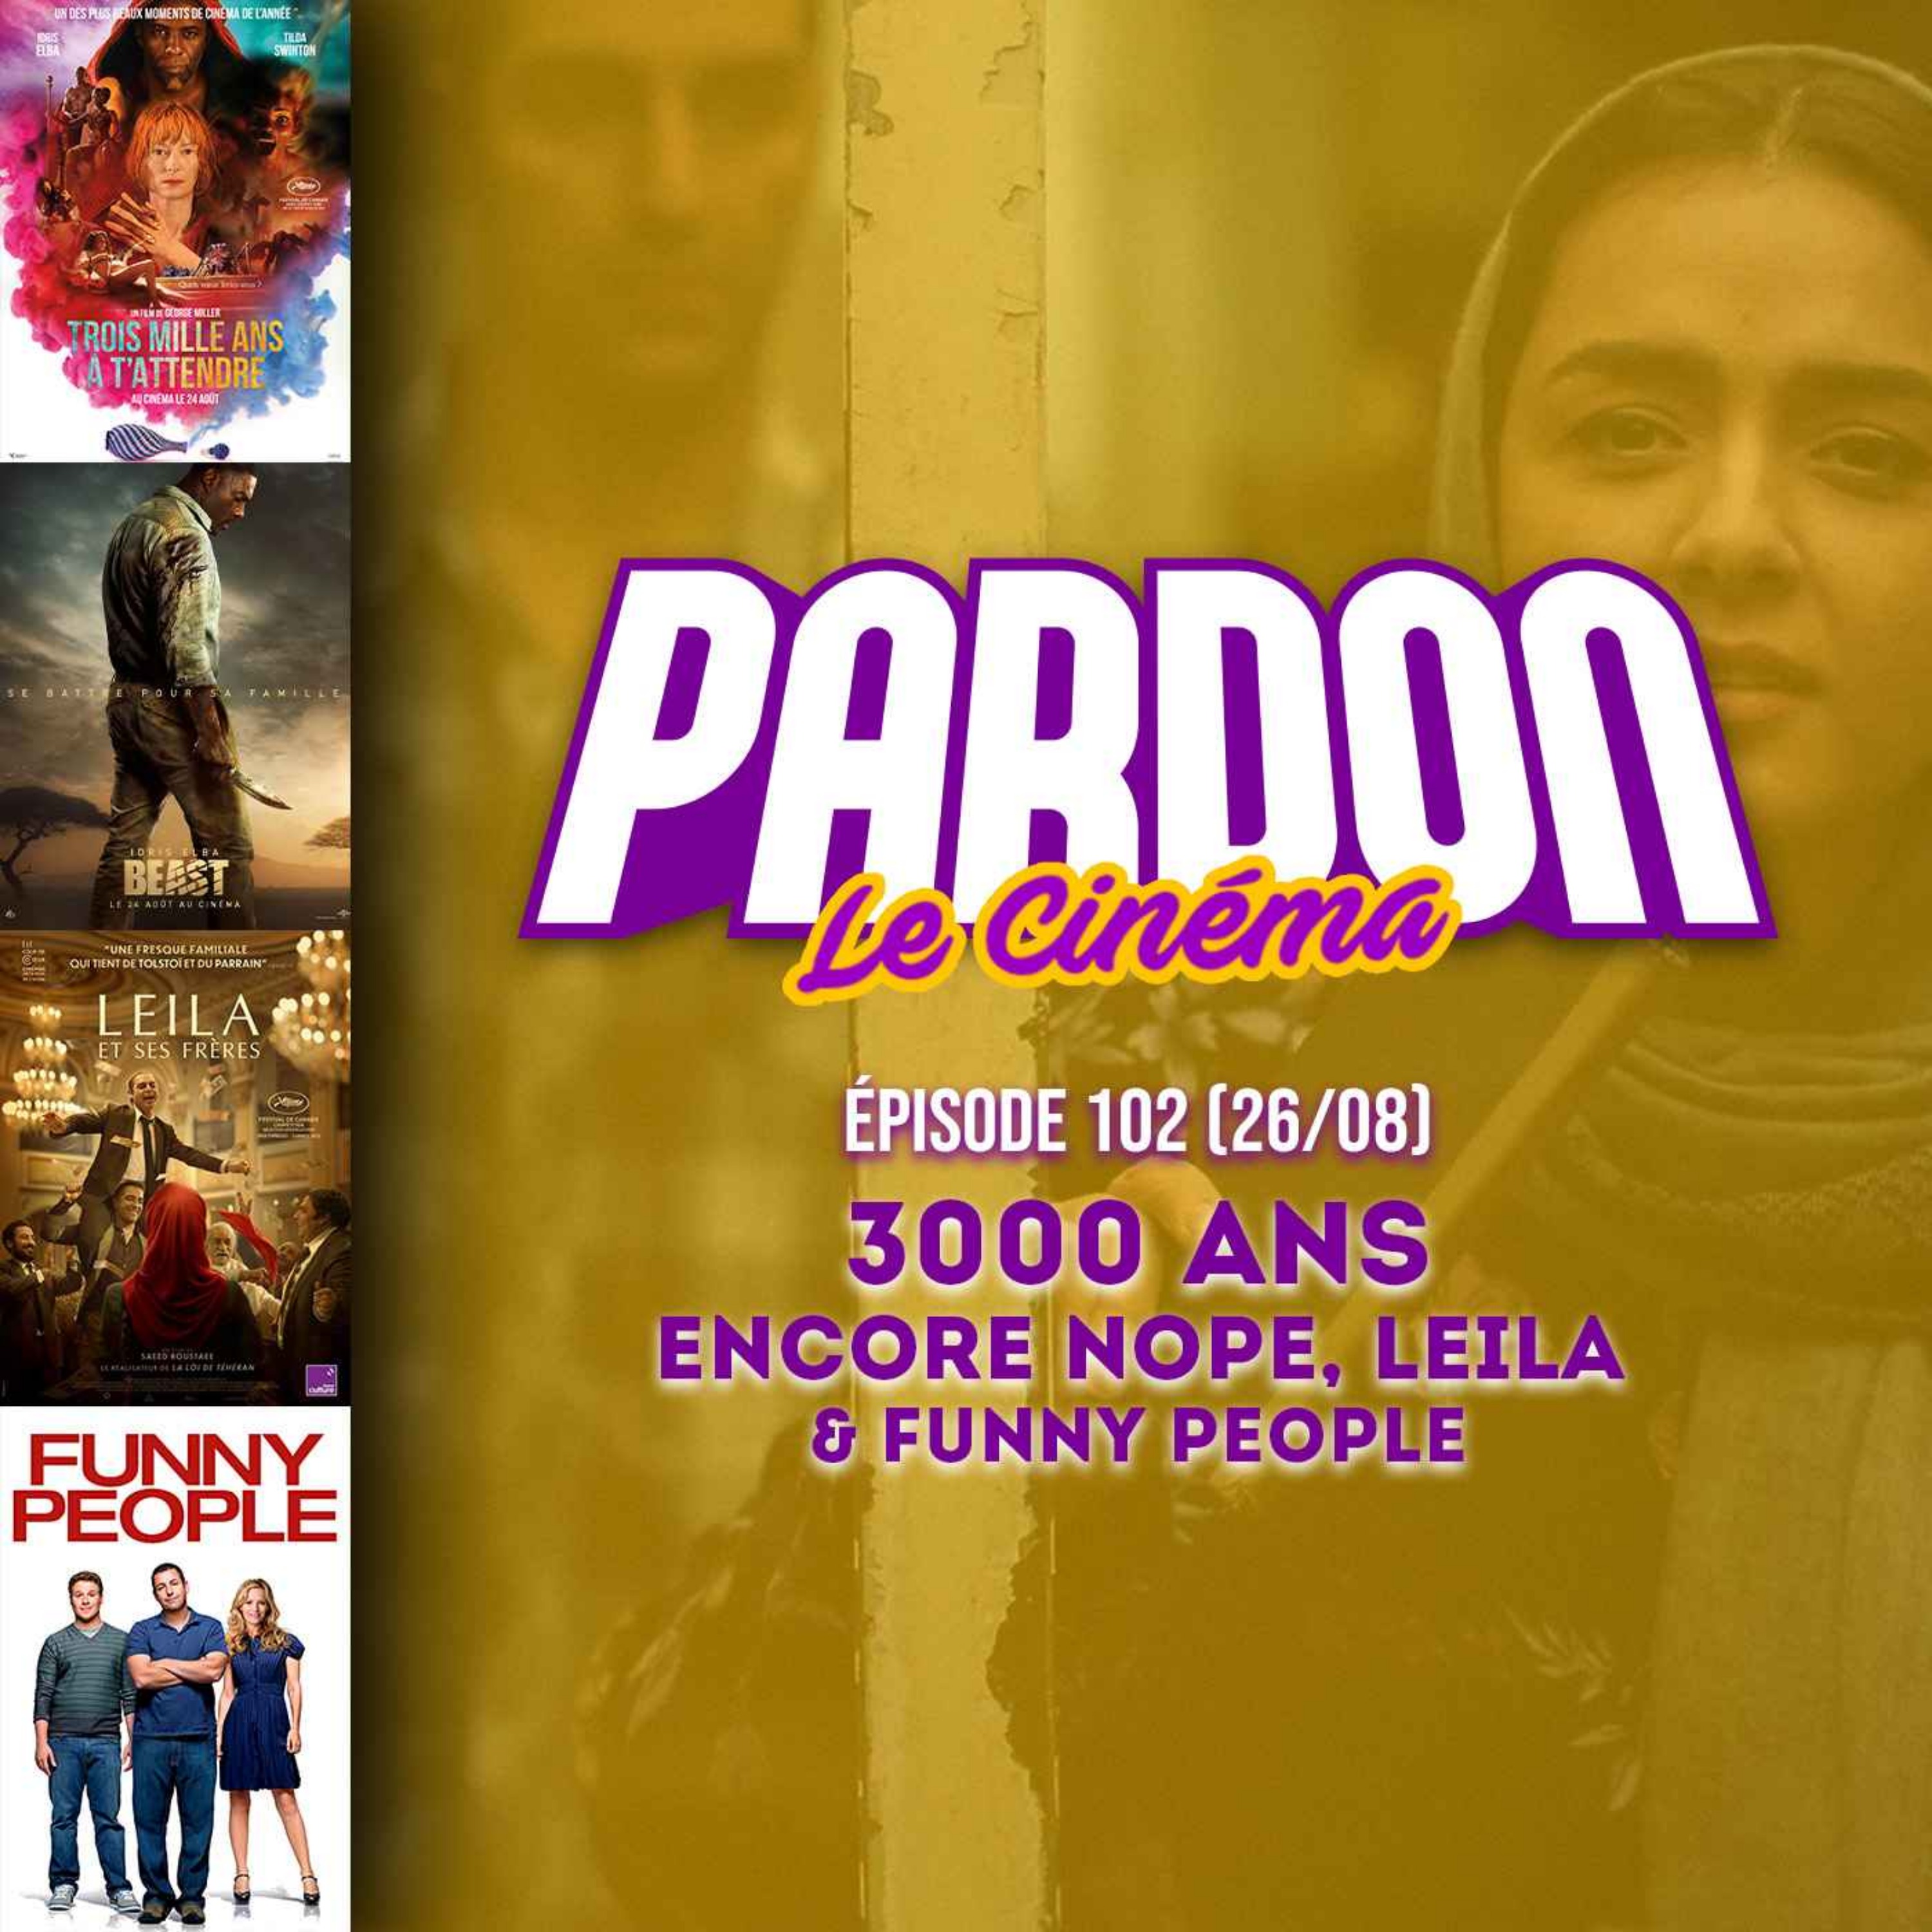 3000 ANS, ENCORE NOPE, LEILA & FUNNY PEOPLE